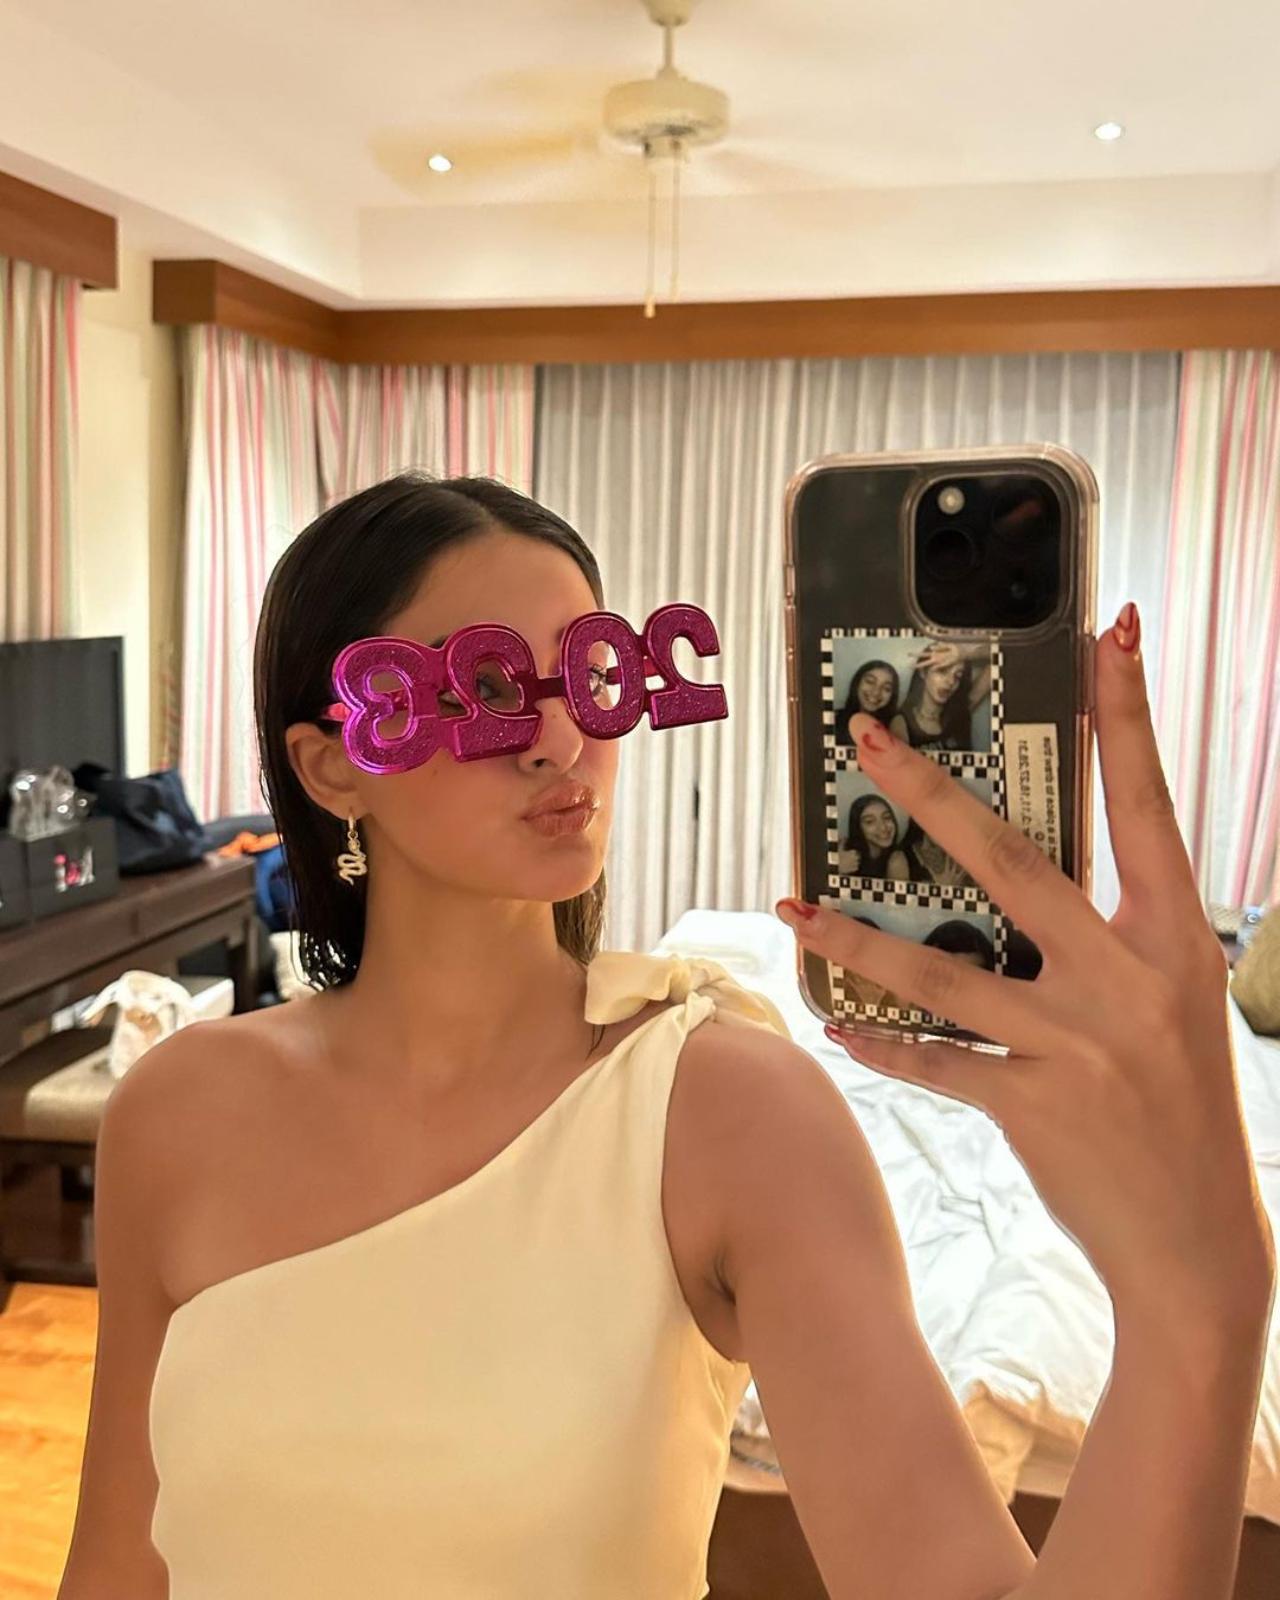 Ananya took to her Instagram handle over the past few days and flooded the gram with her pictures from her time in Thailand. From selfies to the stellar location, Ananya gave a glimpse of it all. 
In the above picture, the actress can be seen wearing glasses shaped to read 2023 and can be seen doing a pout while taking a mirror selfie. 